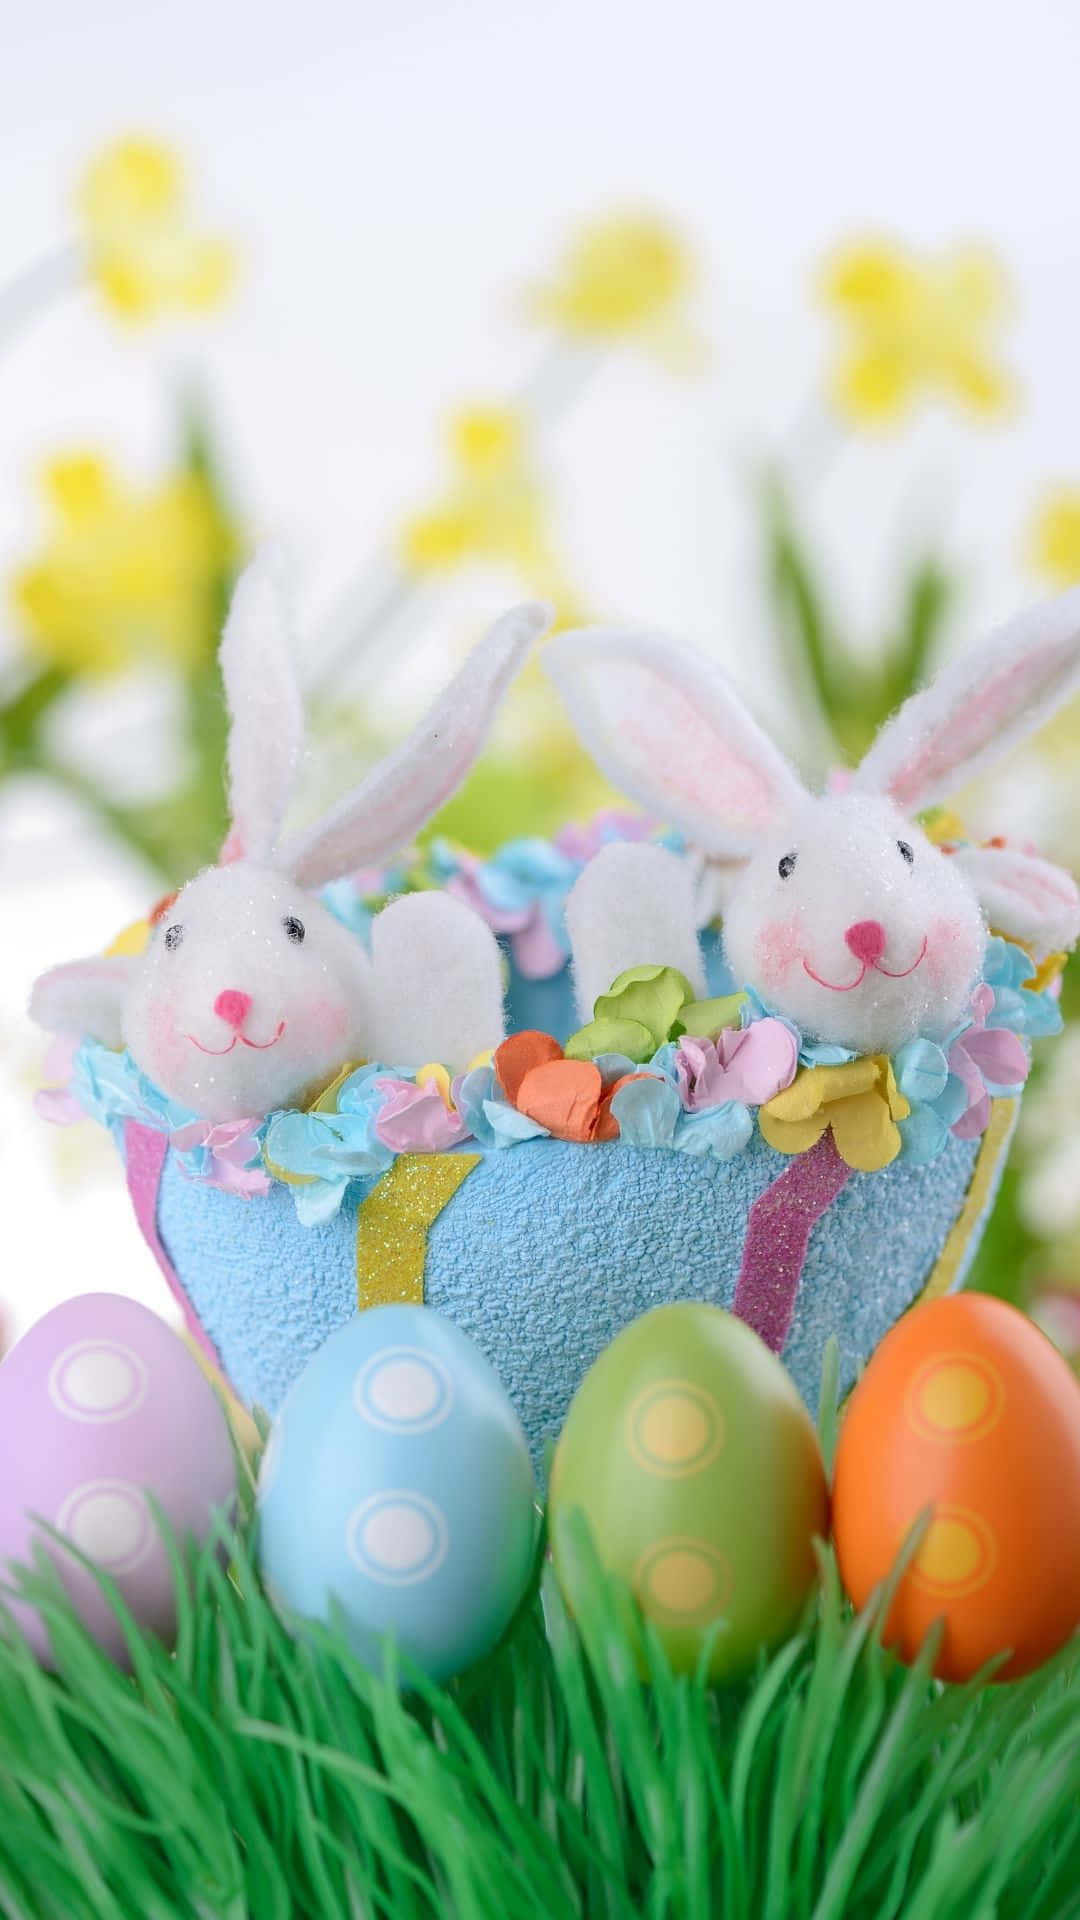 The Easter Bunny bringing a basket of flowers and chocolate eggs for you. Wallpaper